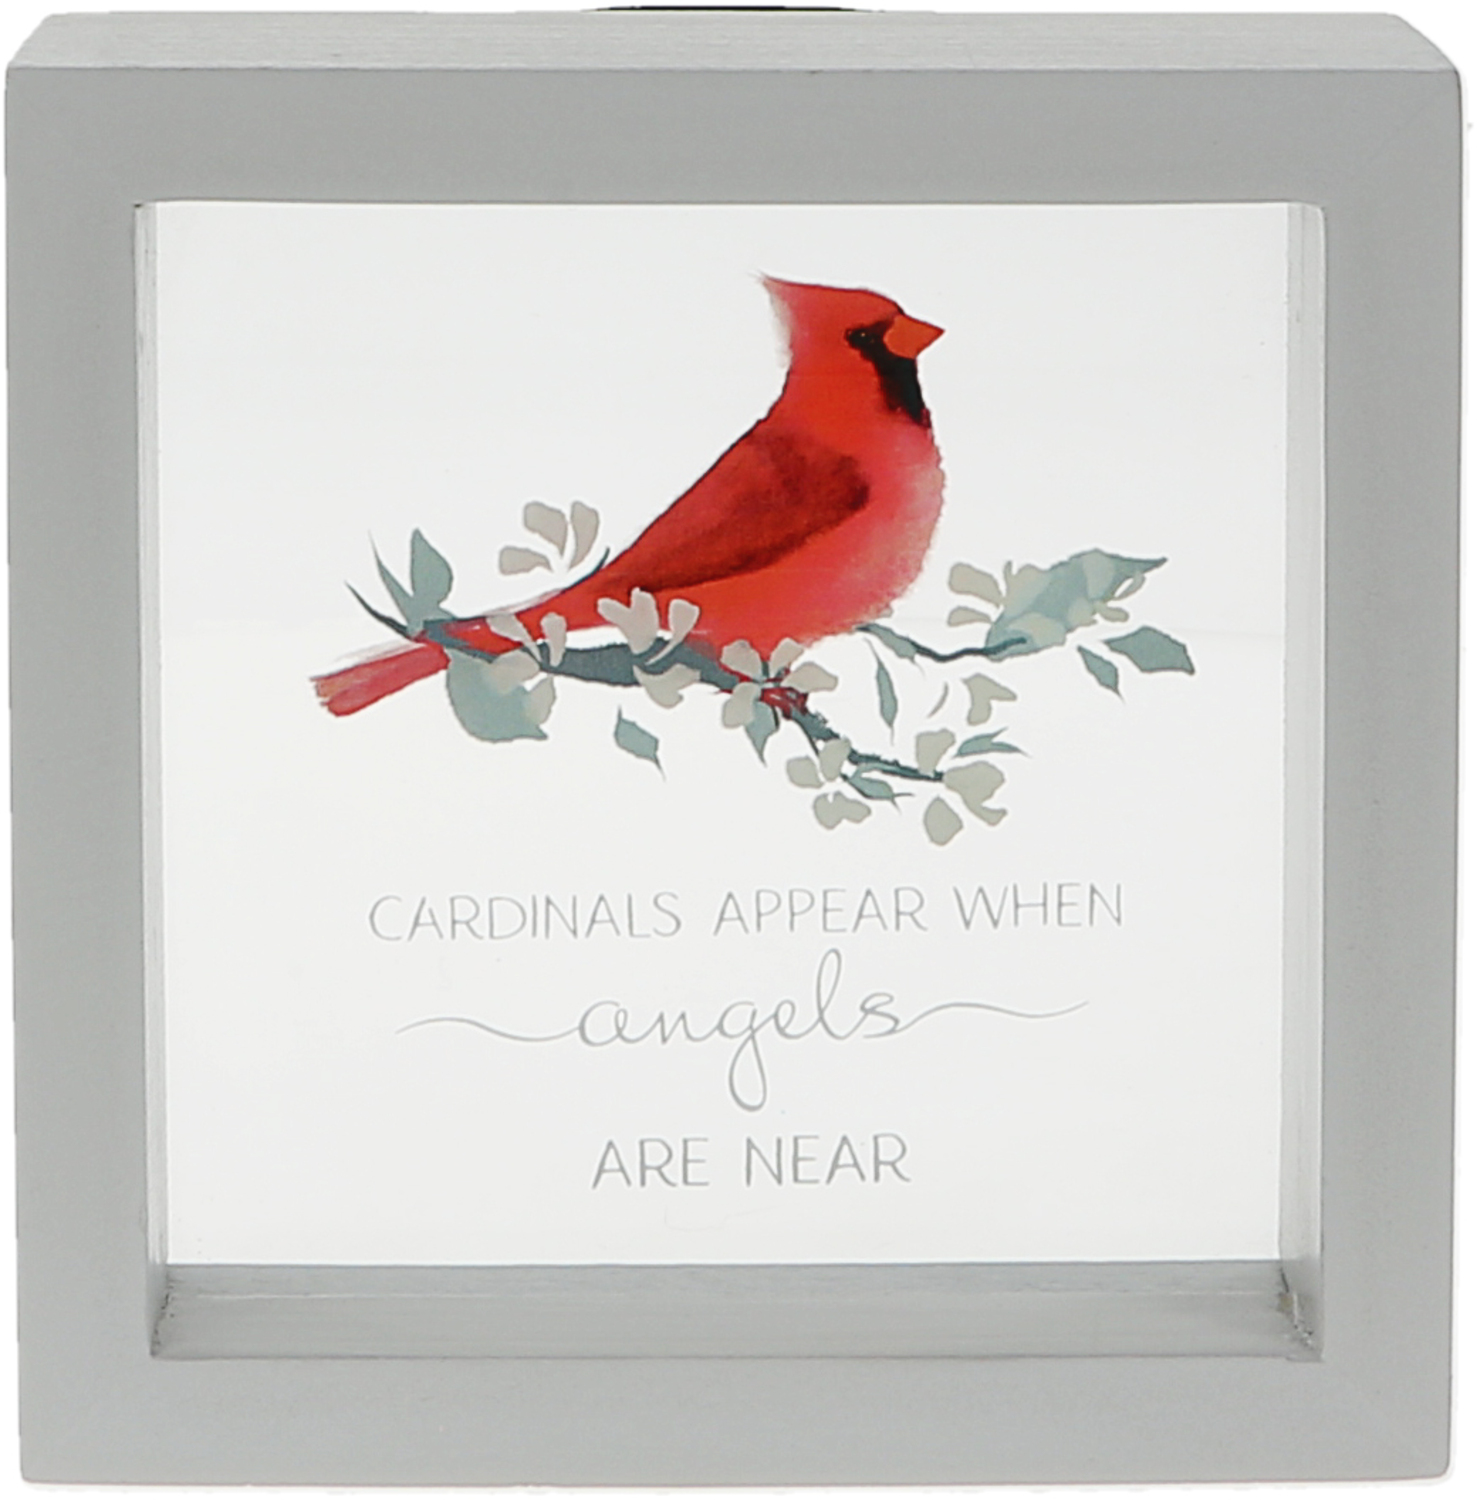 Cardinals Appear by Always by Your Side - Cardinals Appear - 5" x 5" Framed Glass Plaque